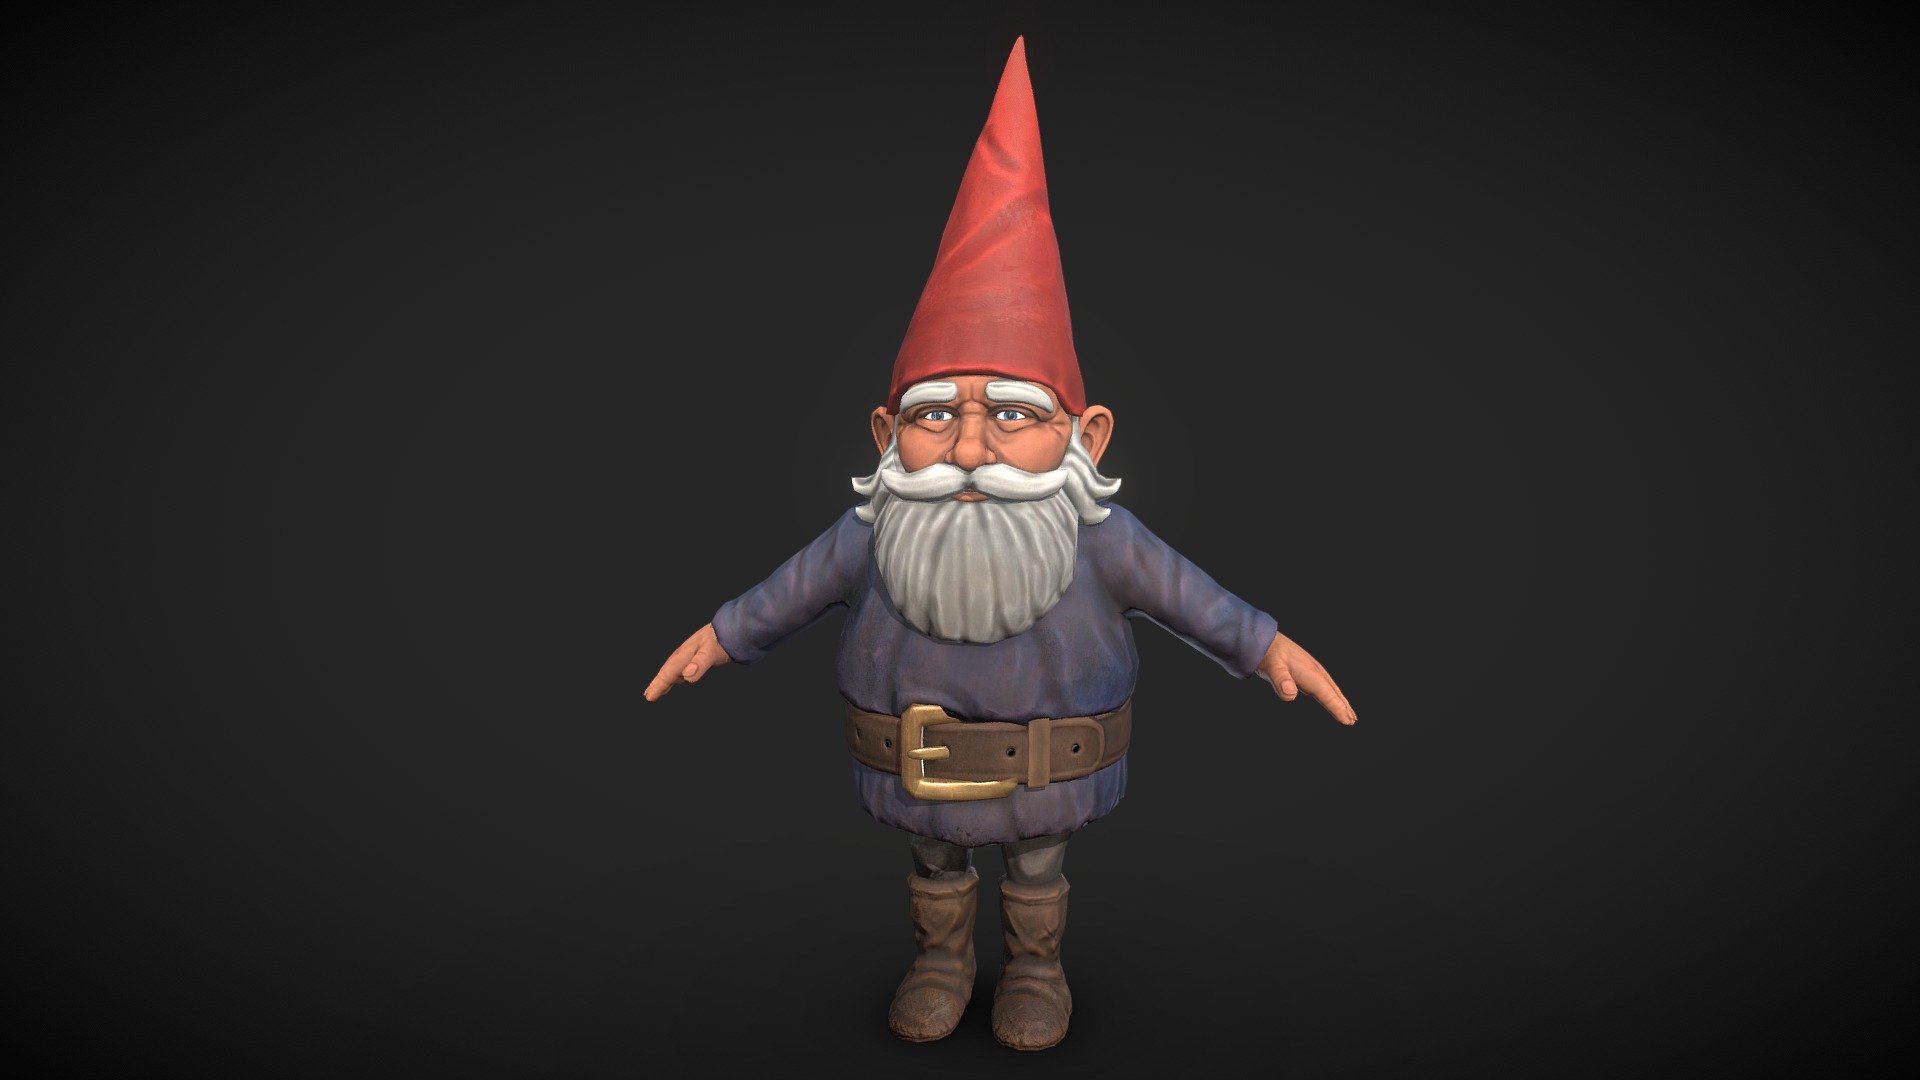 A PBR gnome I worked on to learn the character creation workflow. 
I used the book &ldquo;gnomes